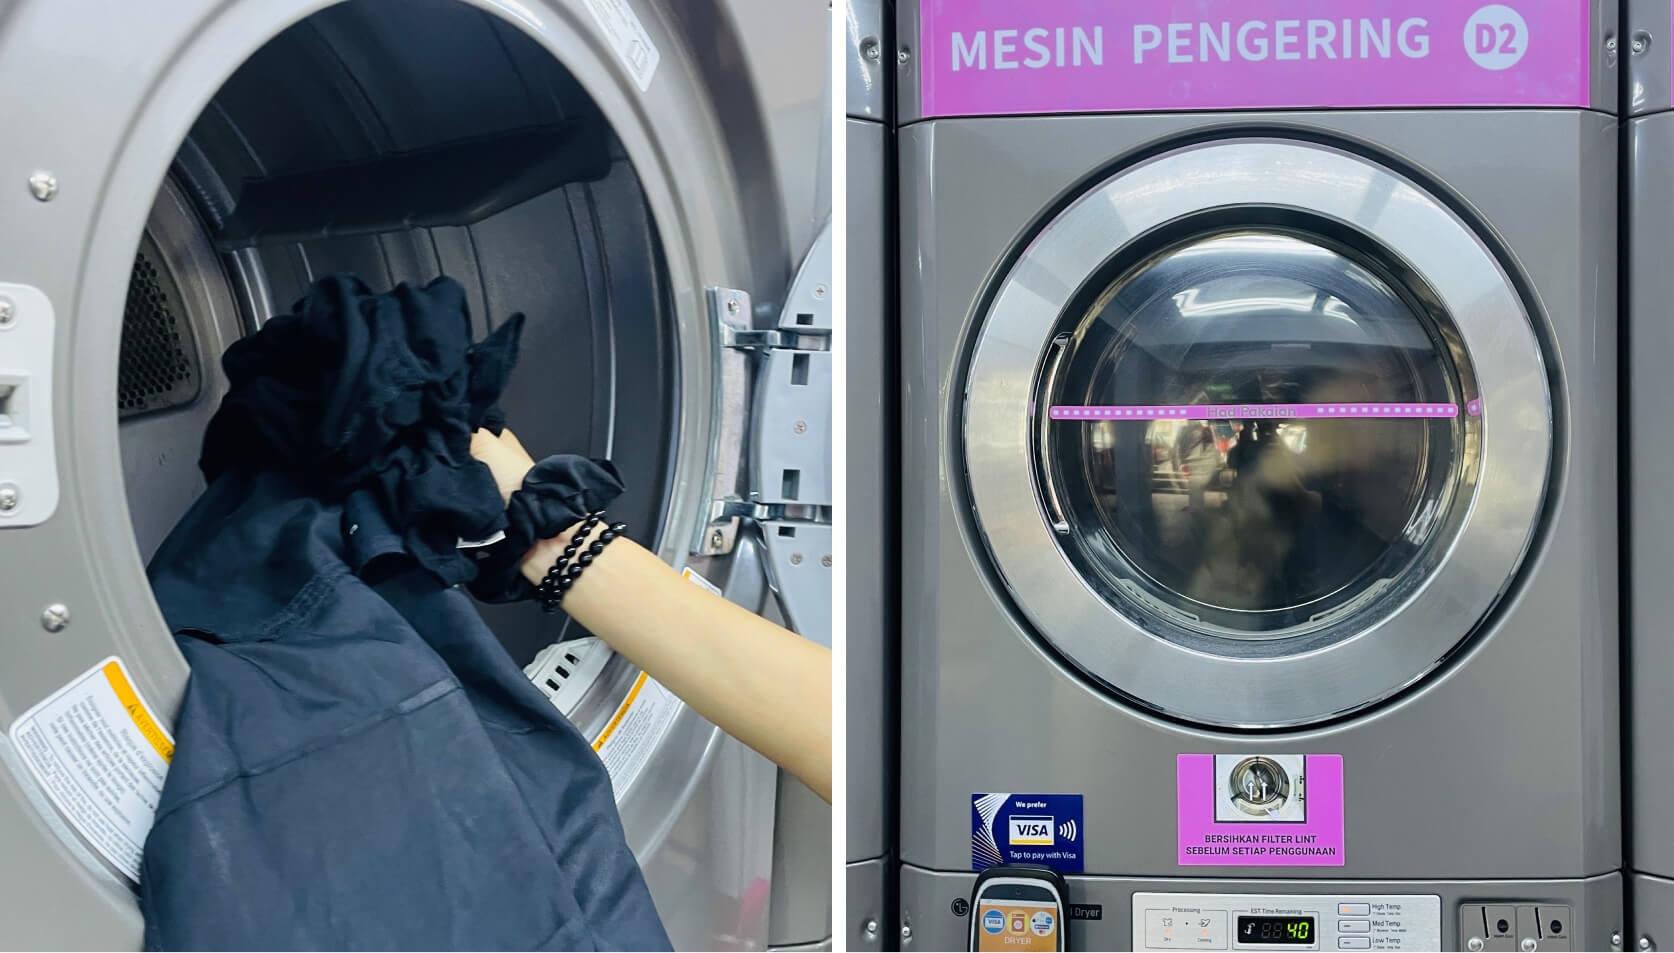 Cleanpro customer loading laundry and securely close the dryer door